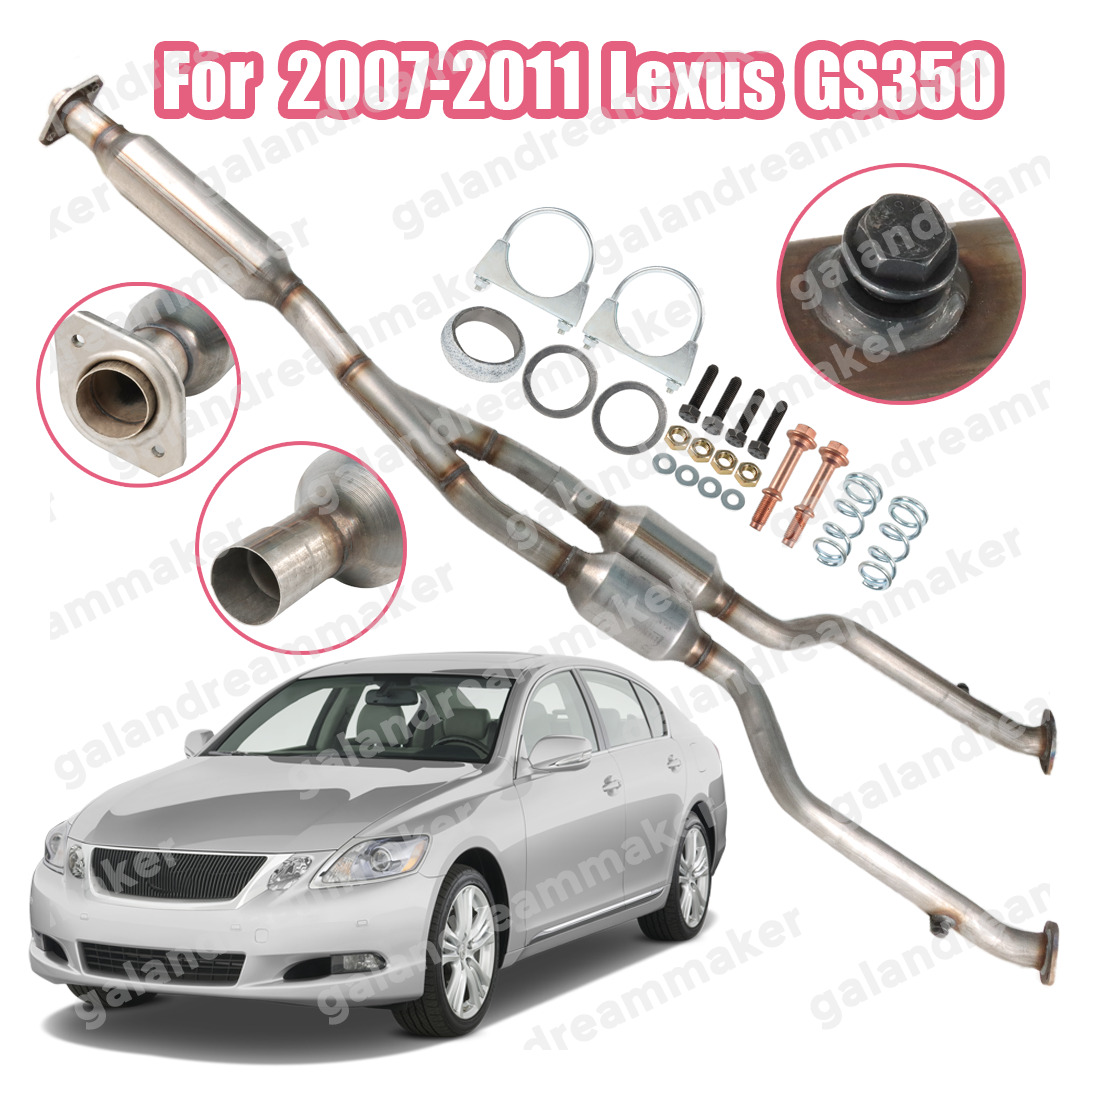 For 2007-2011 Lexus GS350 Rear Y Pipe & Catalyst Converter 4WD18H52-95